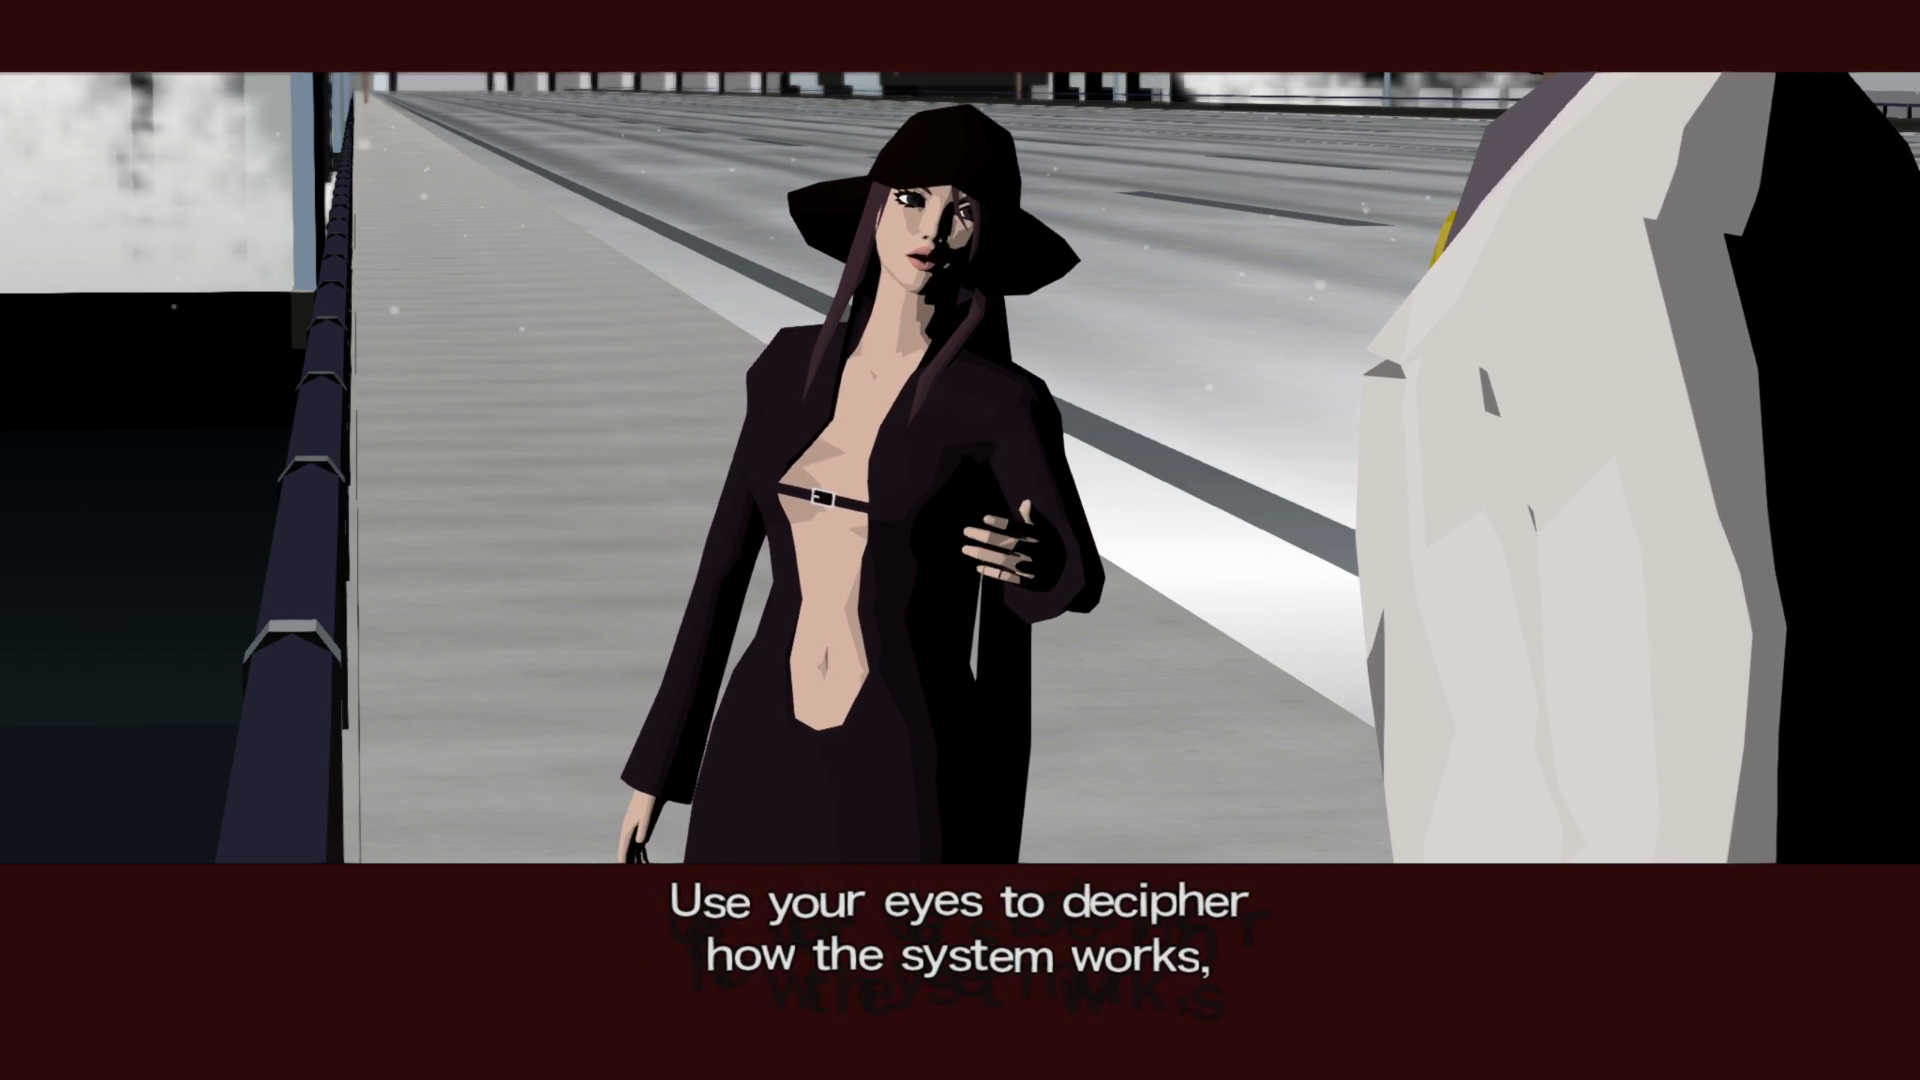 Linda Vermillion, a woman in a weirdly revealing black outfit despite the snow, tells Garcian, "Use your eyes to decipher how the system works,"